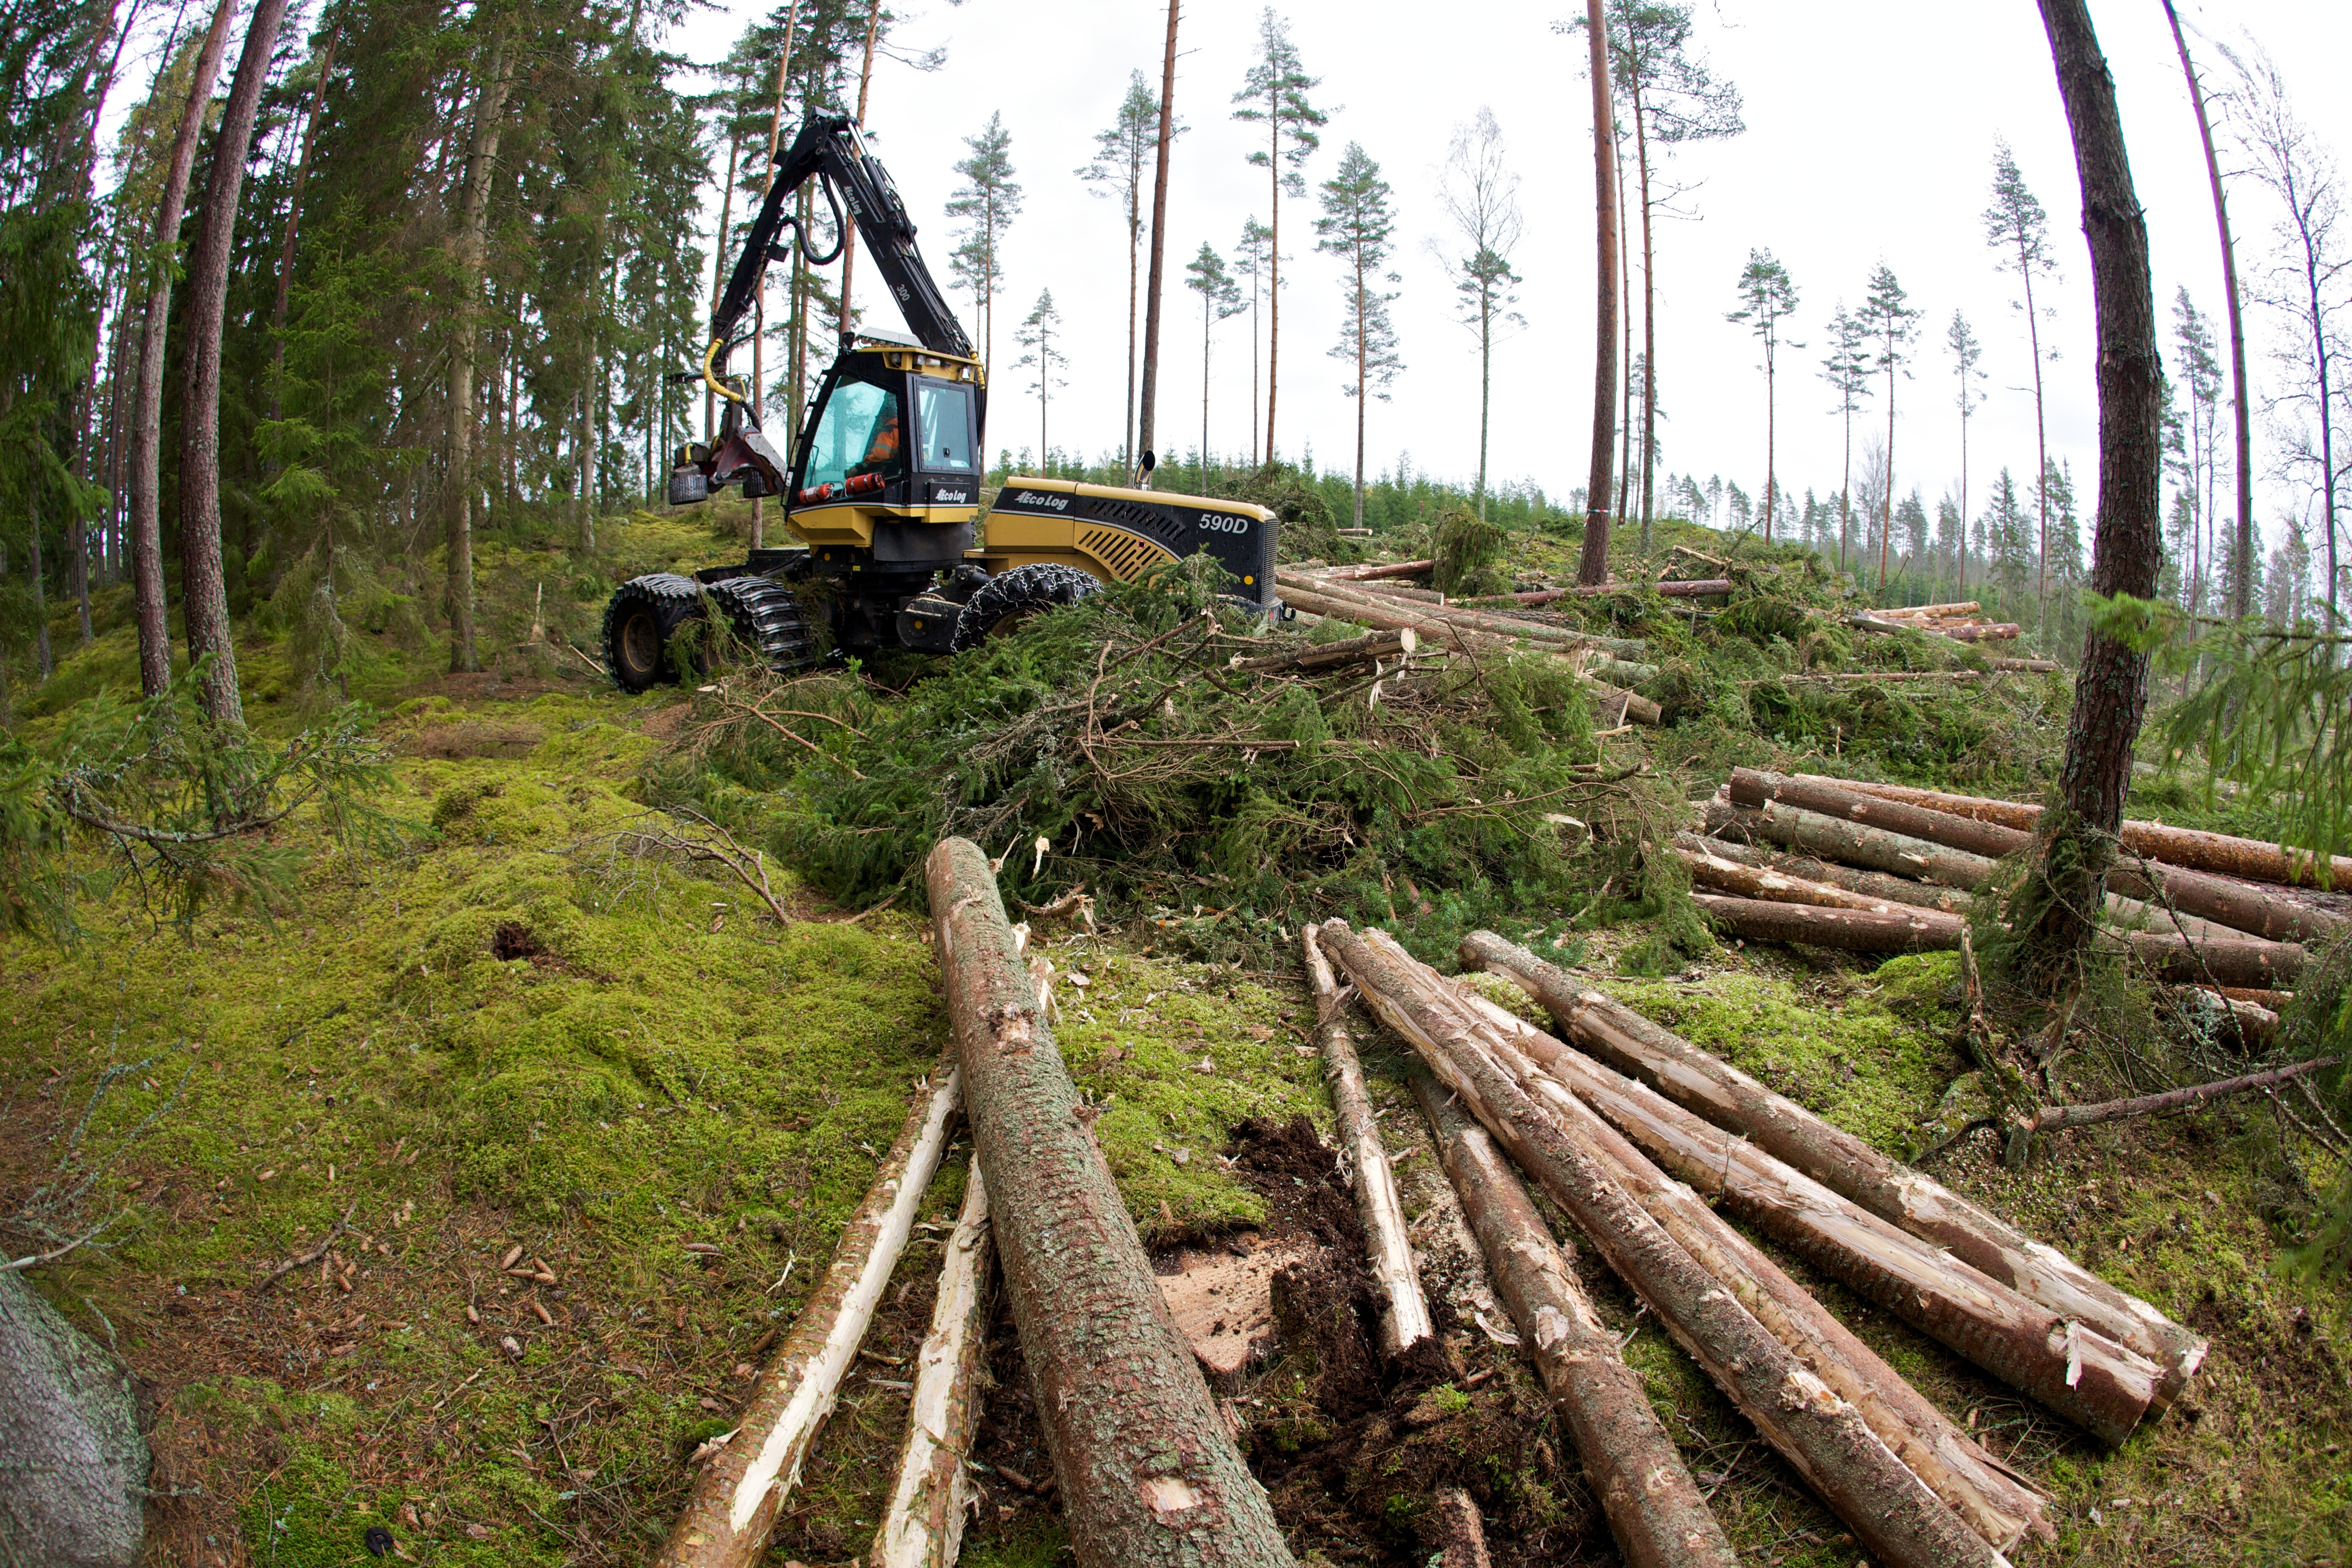 The Swedish forestry model